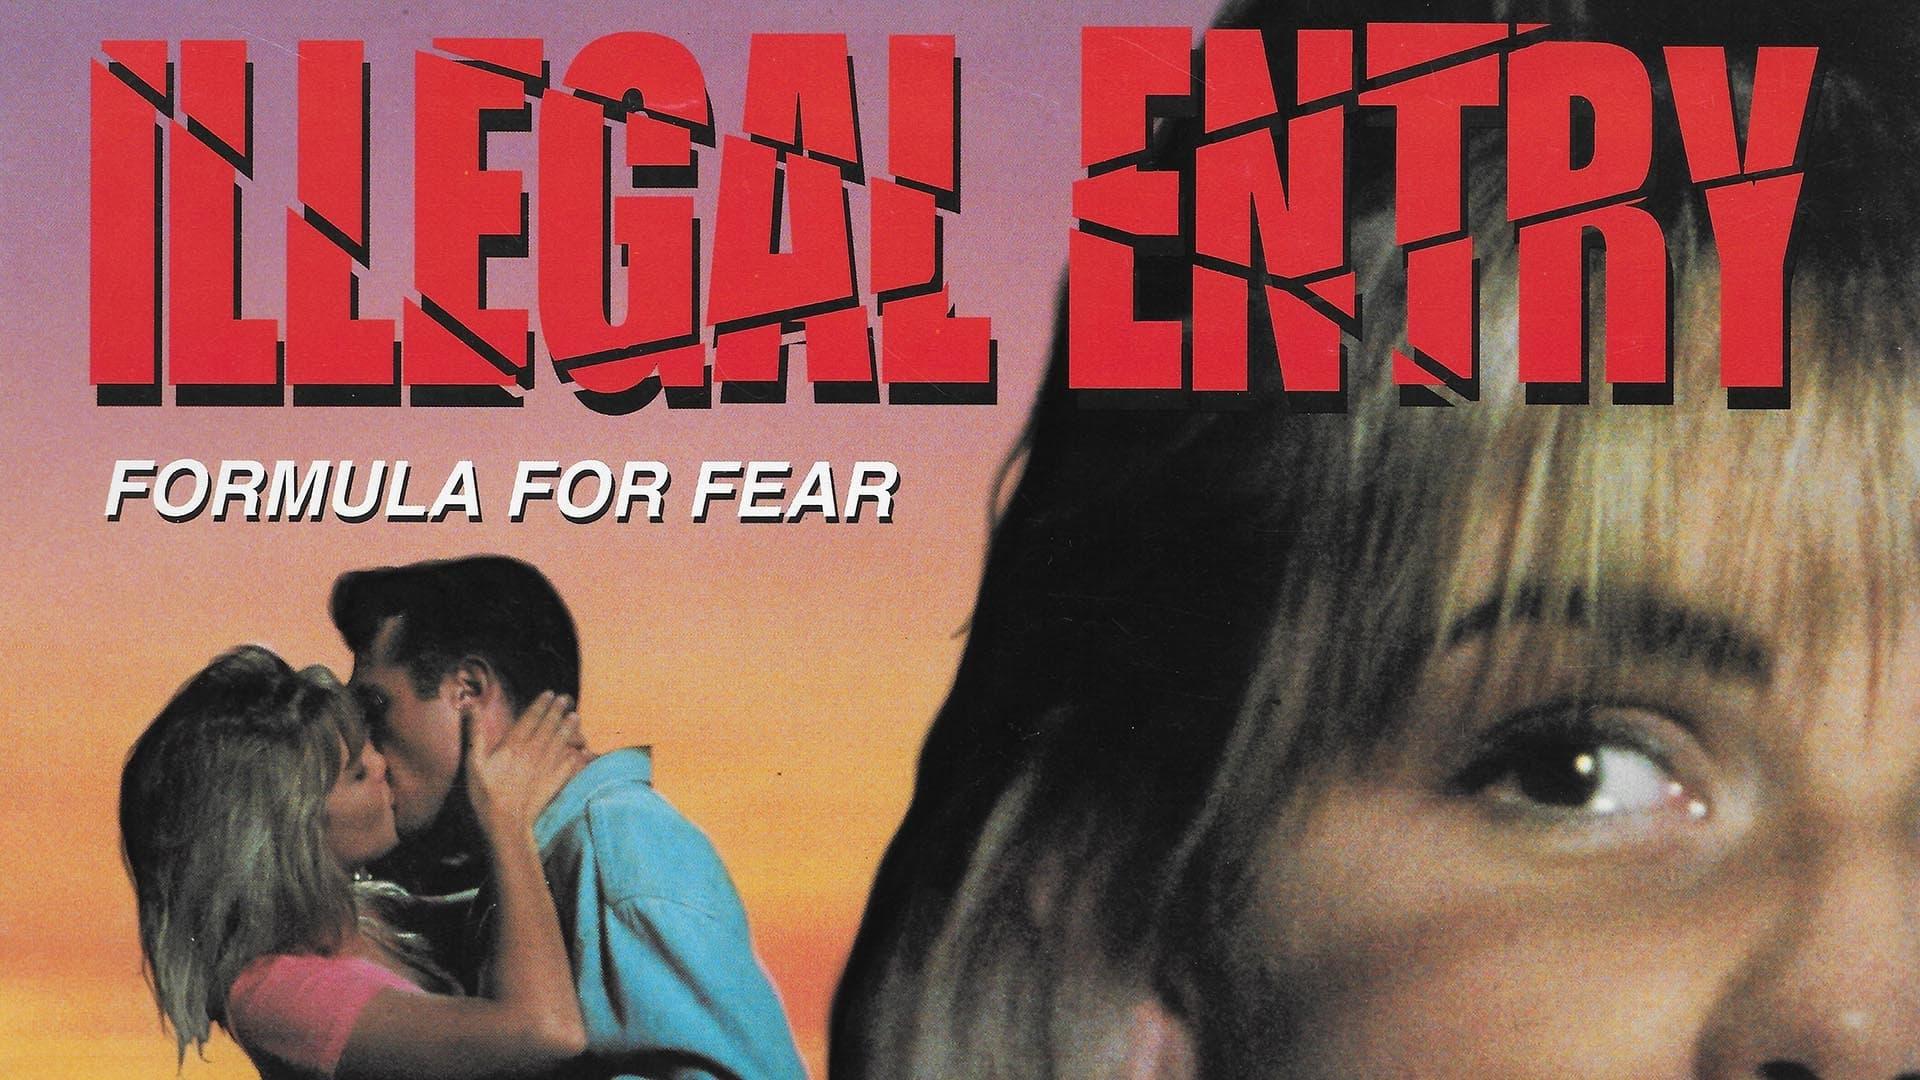 Illegal Entry: Formula for Fear backdrop